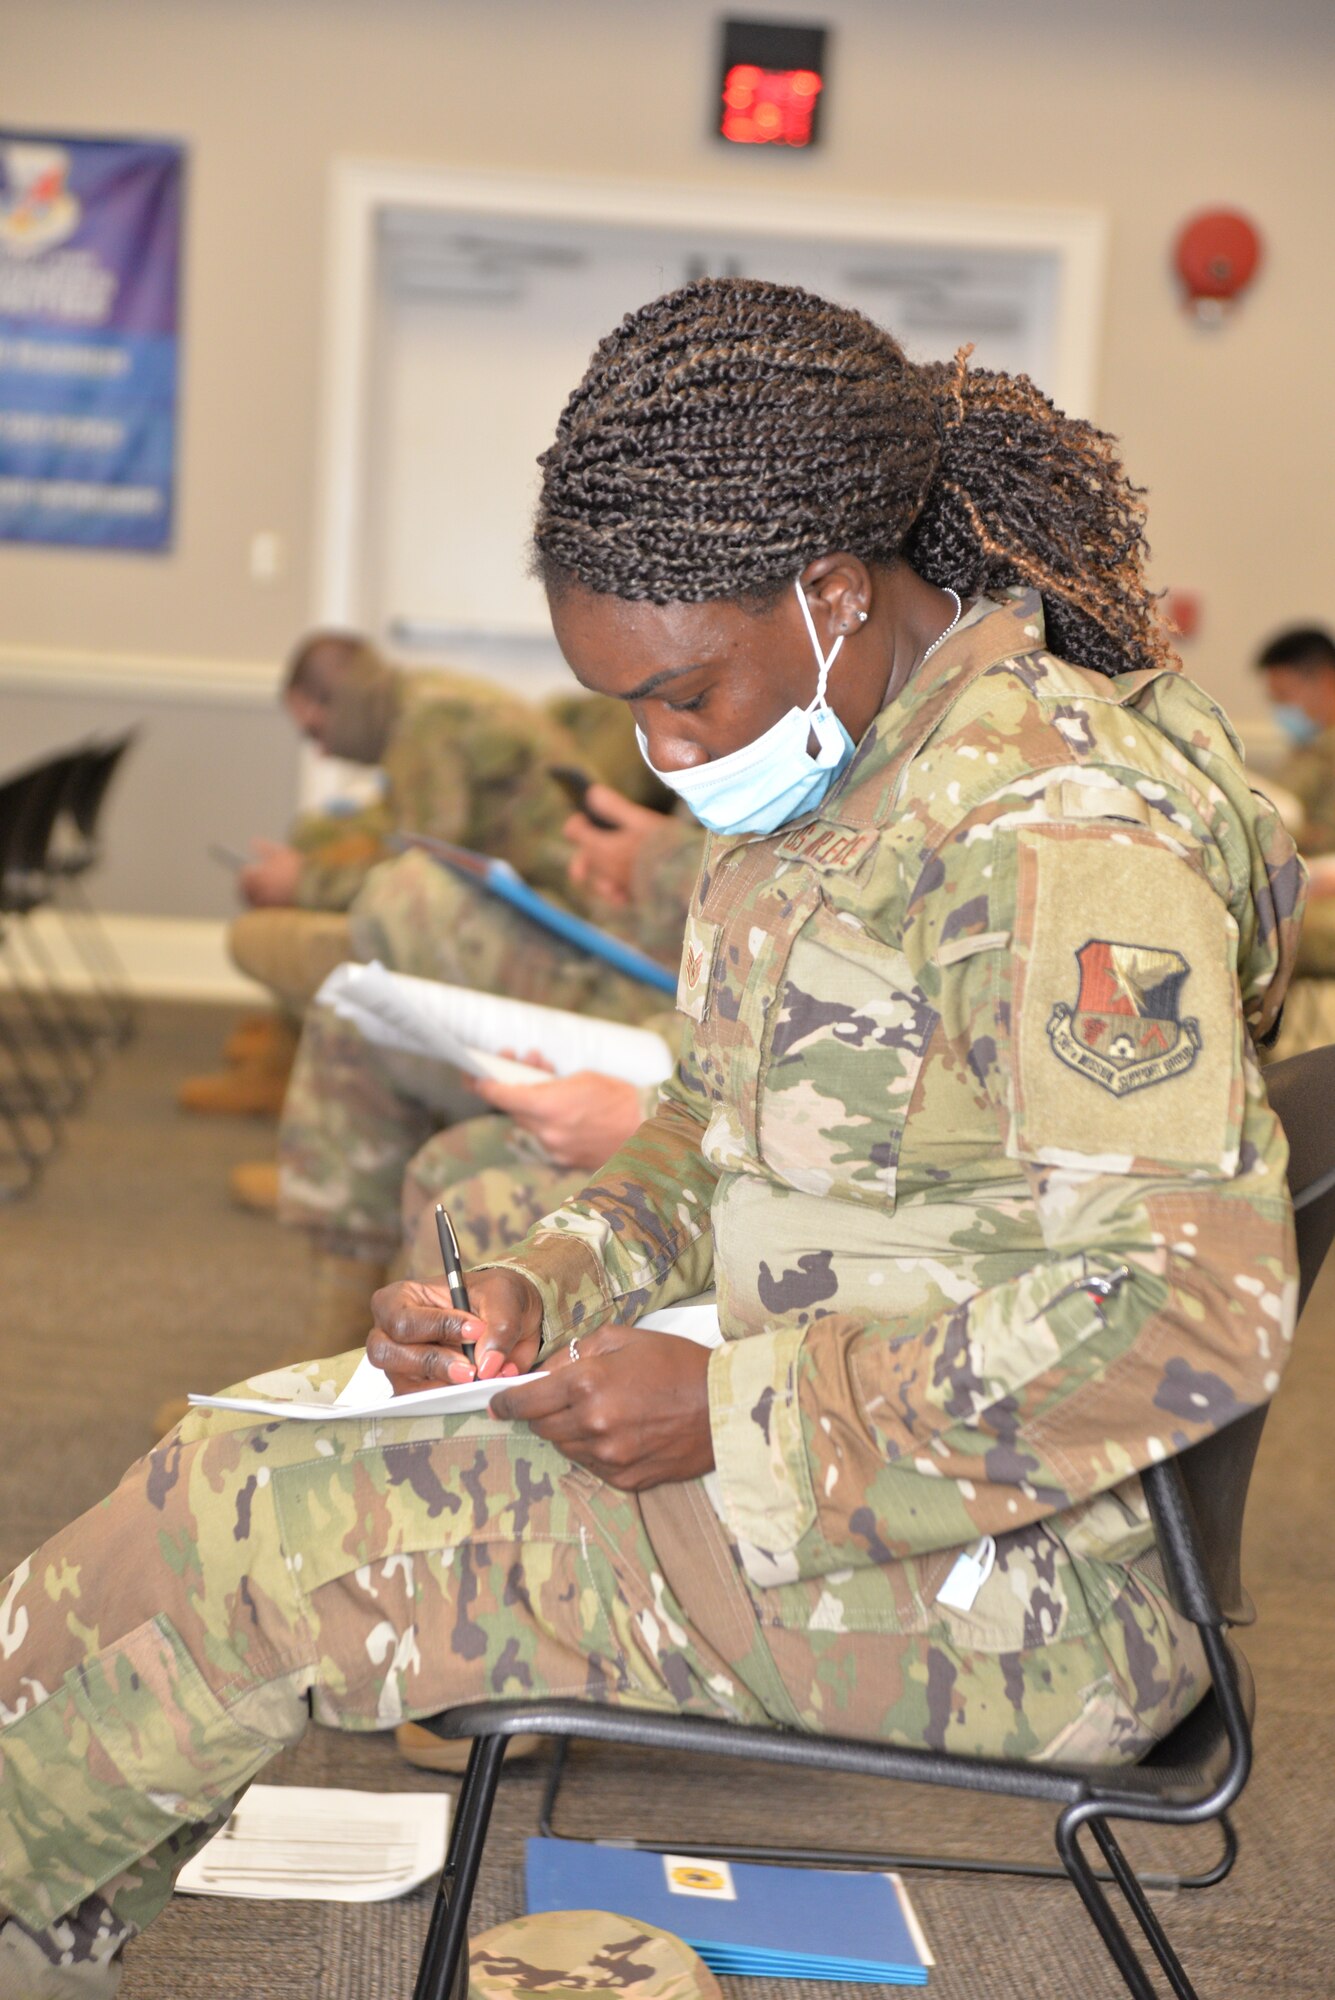 Airman sits and fills out paperwork.